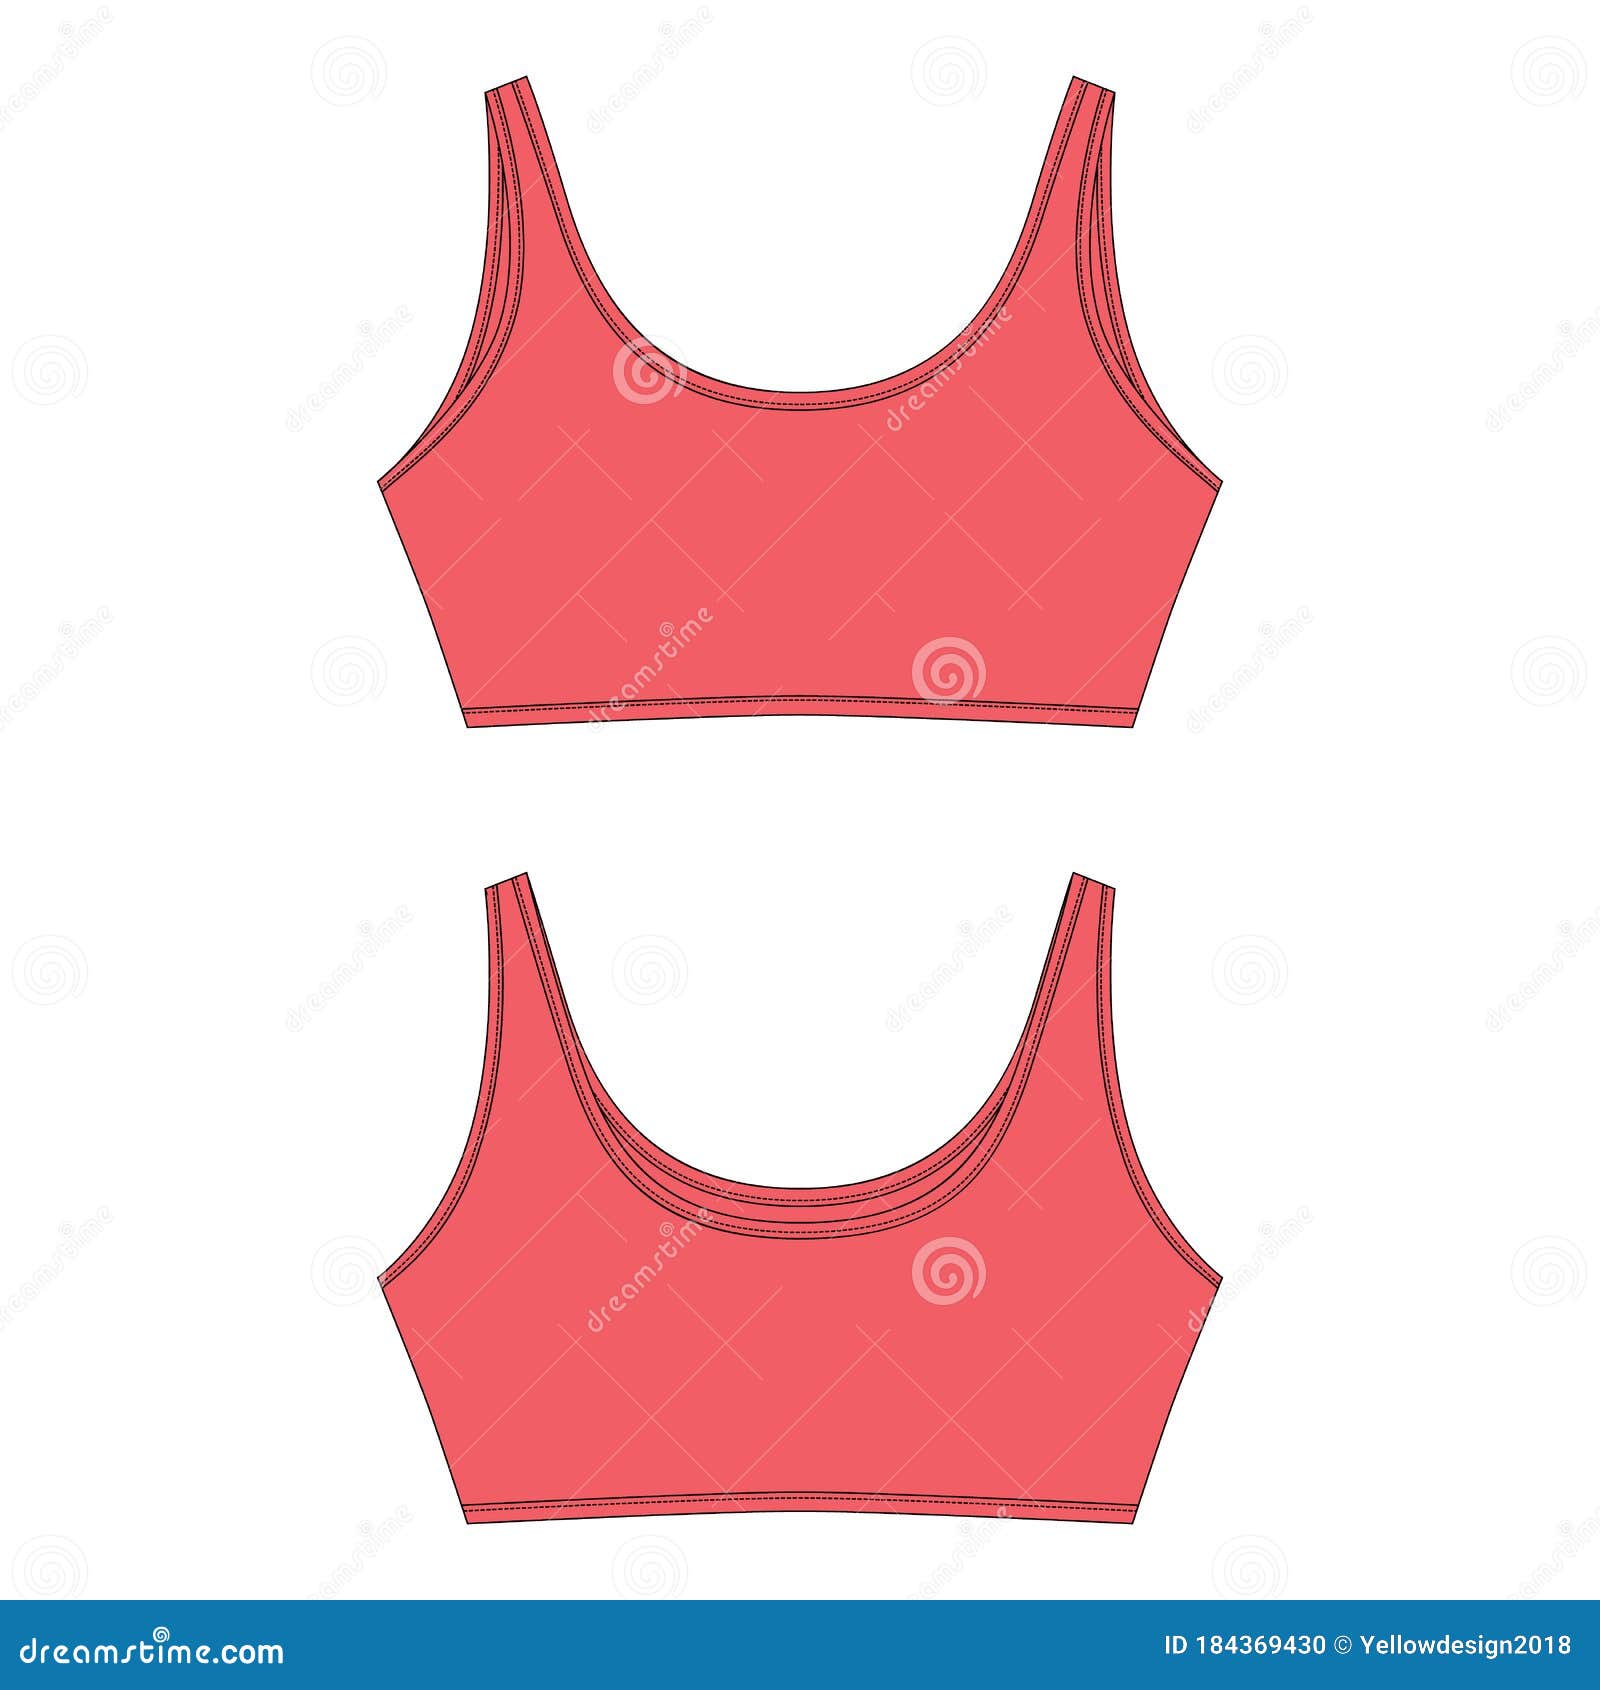 Technical Sketch of Bra in Red Color for Girls Isolated. Yoga